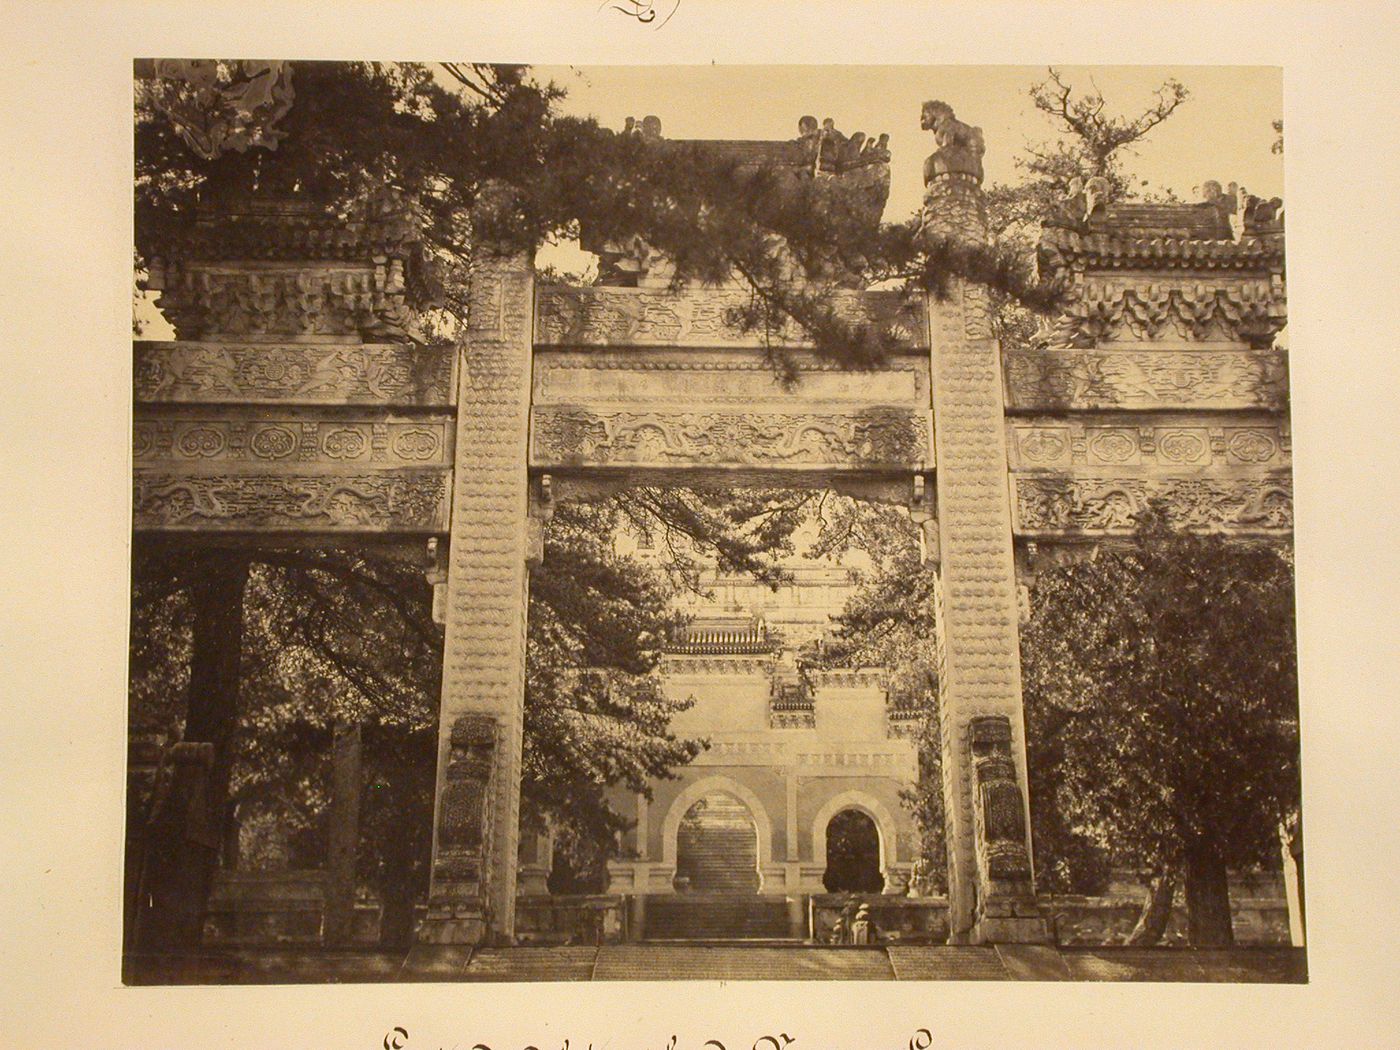 View of the three-arched gateway leading to the Diamond Throne Pagoda in the Azure Clouds Monastery [Biyun Si], seen through a p'ai-lou, Peking (now Beijing), China